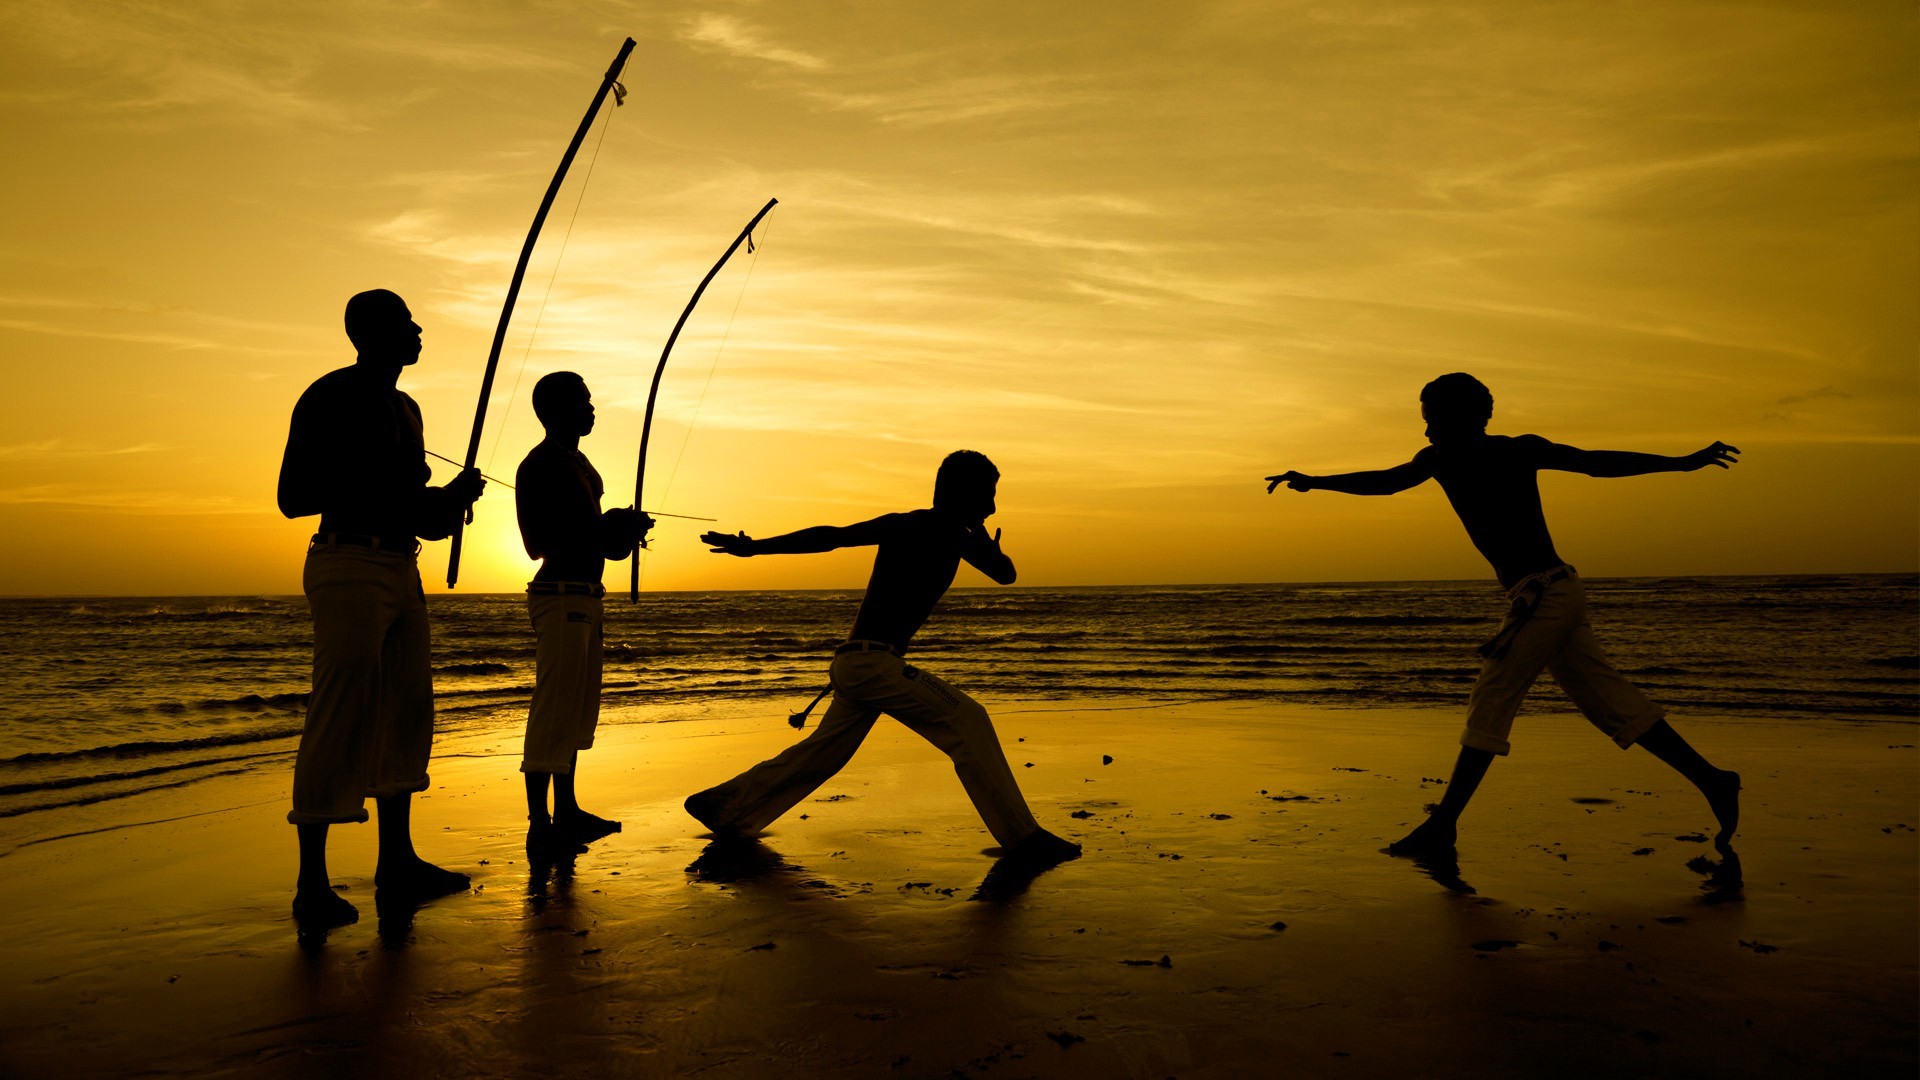 arts images wallpapers,people in nature,fun,friendship,happy,silhouette